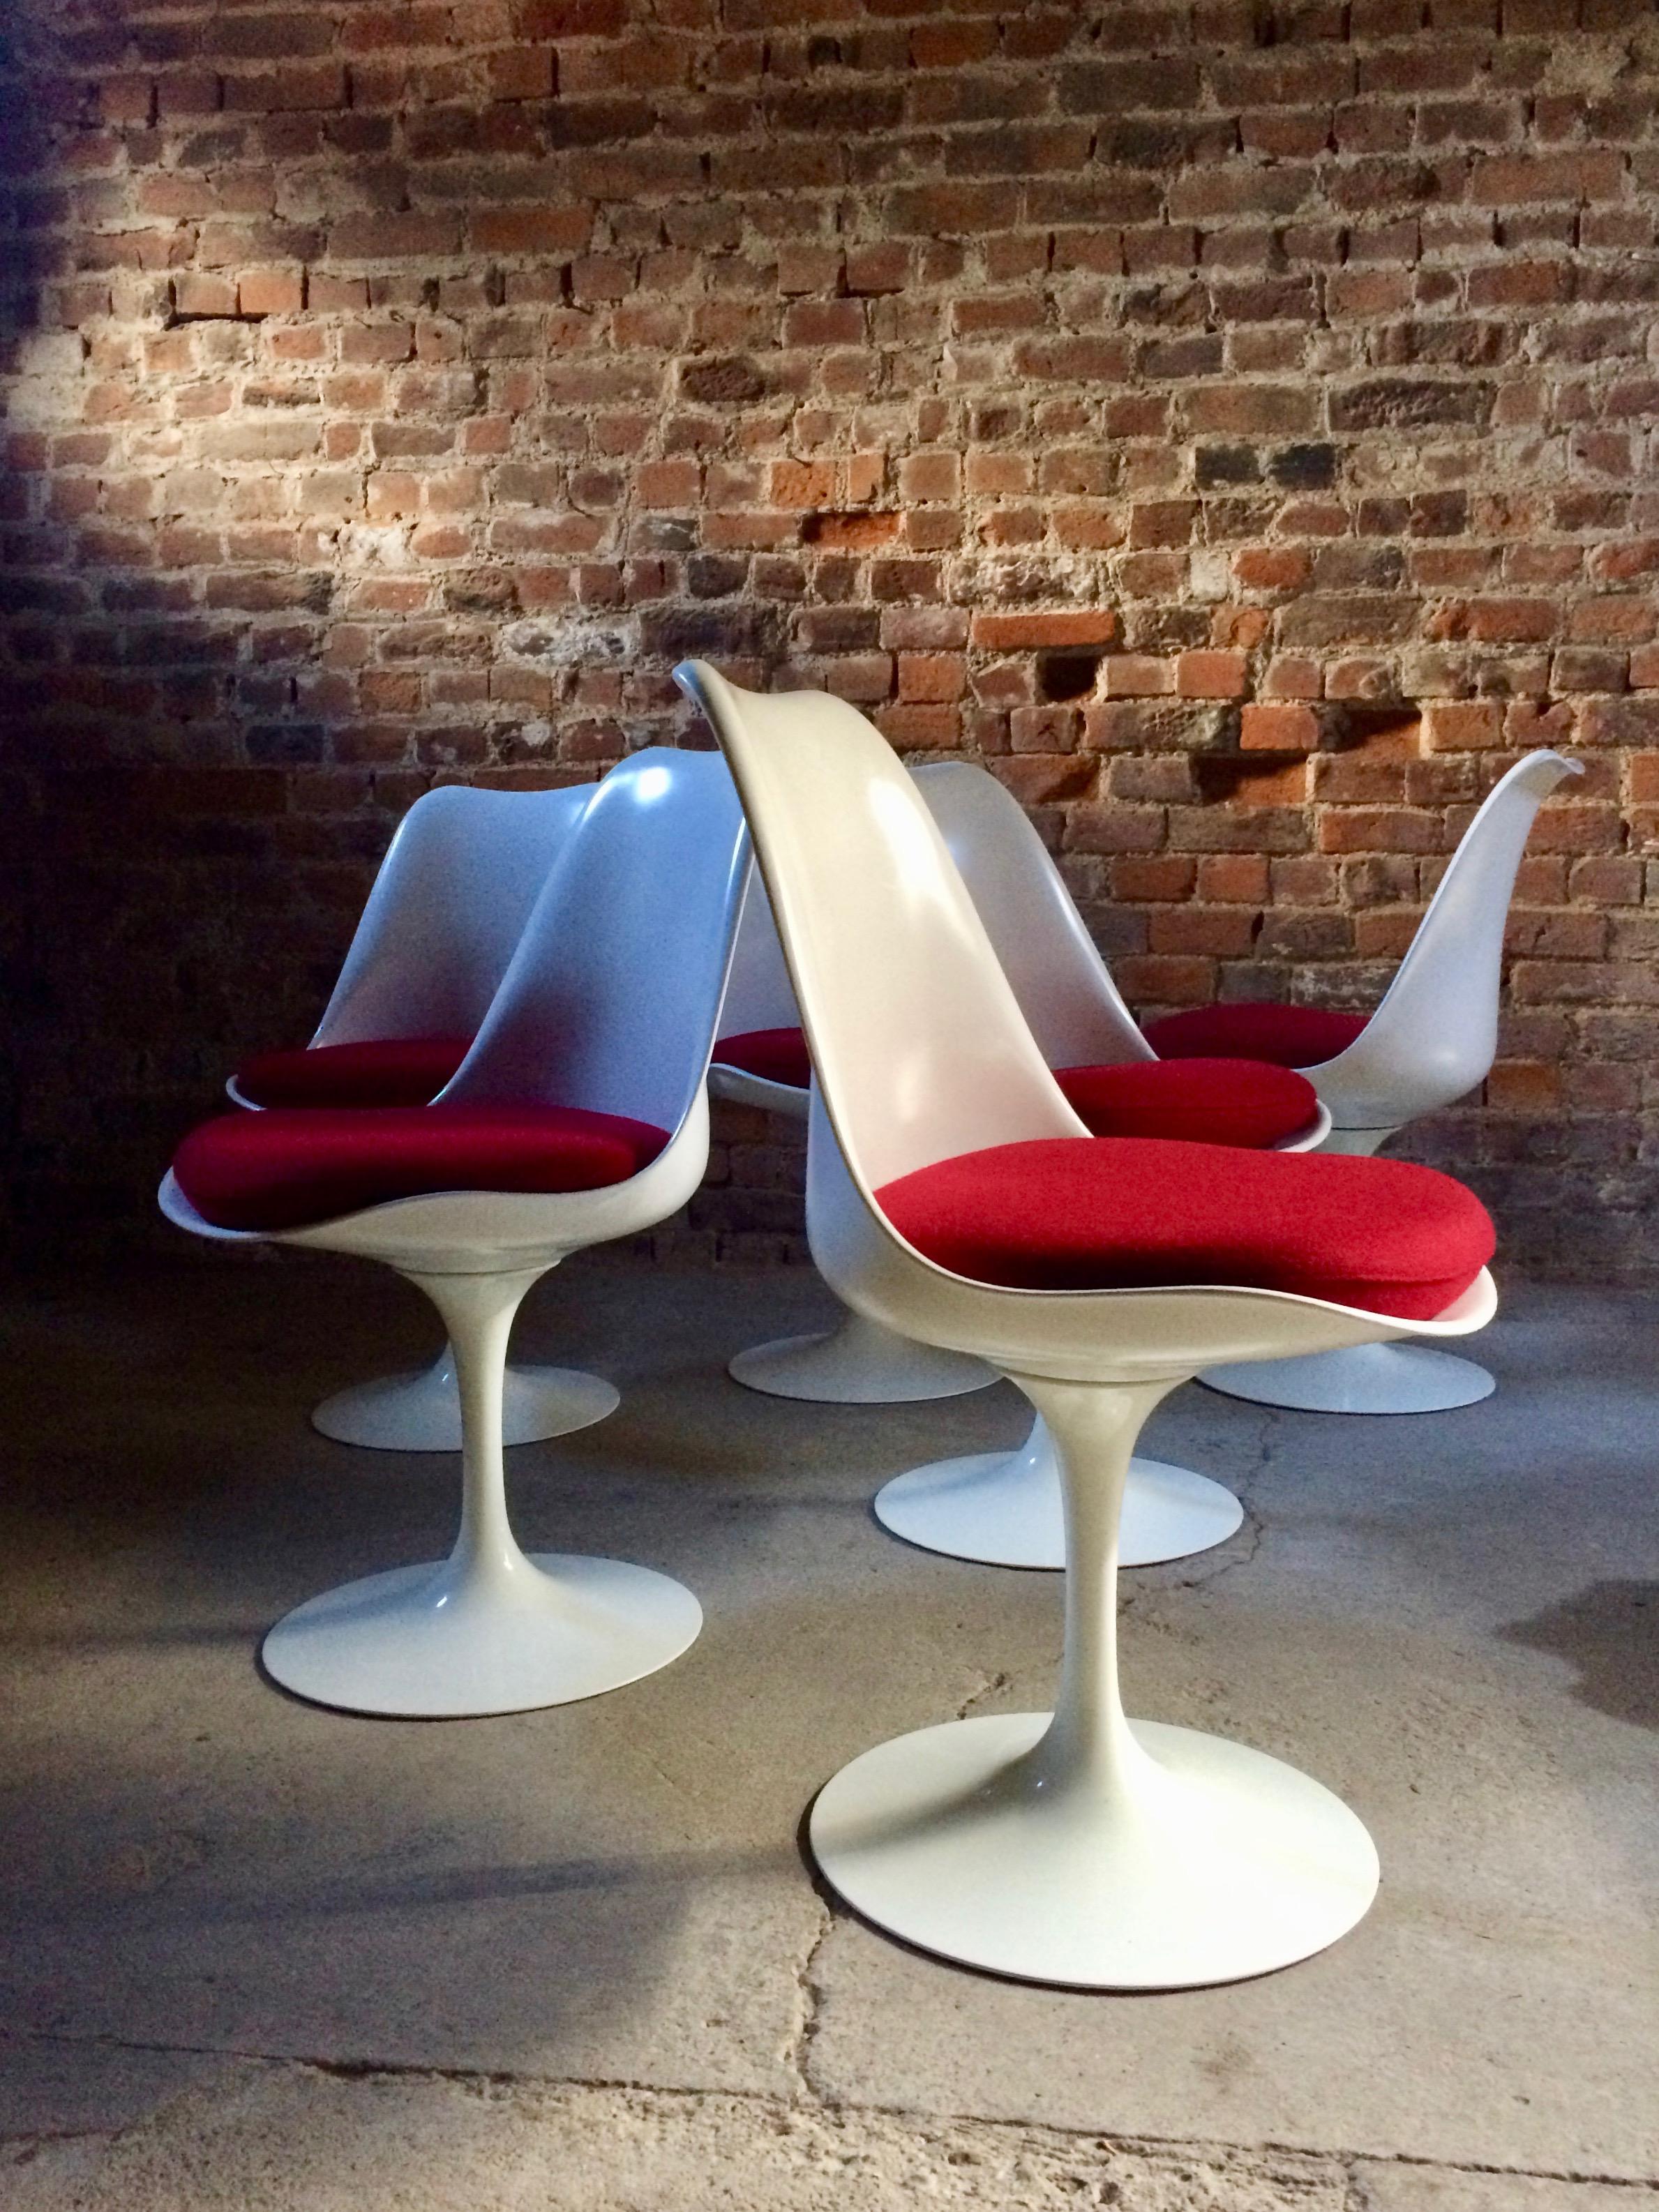 Beautiful set of six Eero Saarinen for Knoll Studio Tulip dining chairs and one Tulip dining table, Florence Knoll was one of the great entrepreneurs of Mid-Century Modern design, one of her most enduring projects was the Tulip dining table created